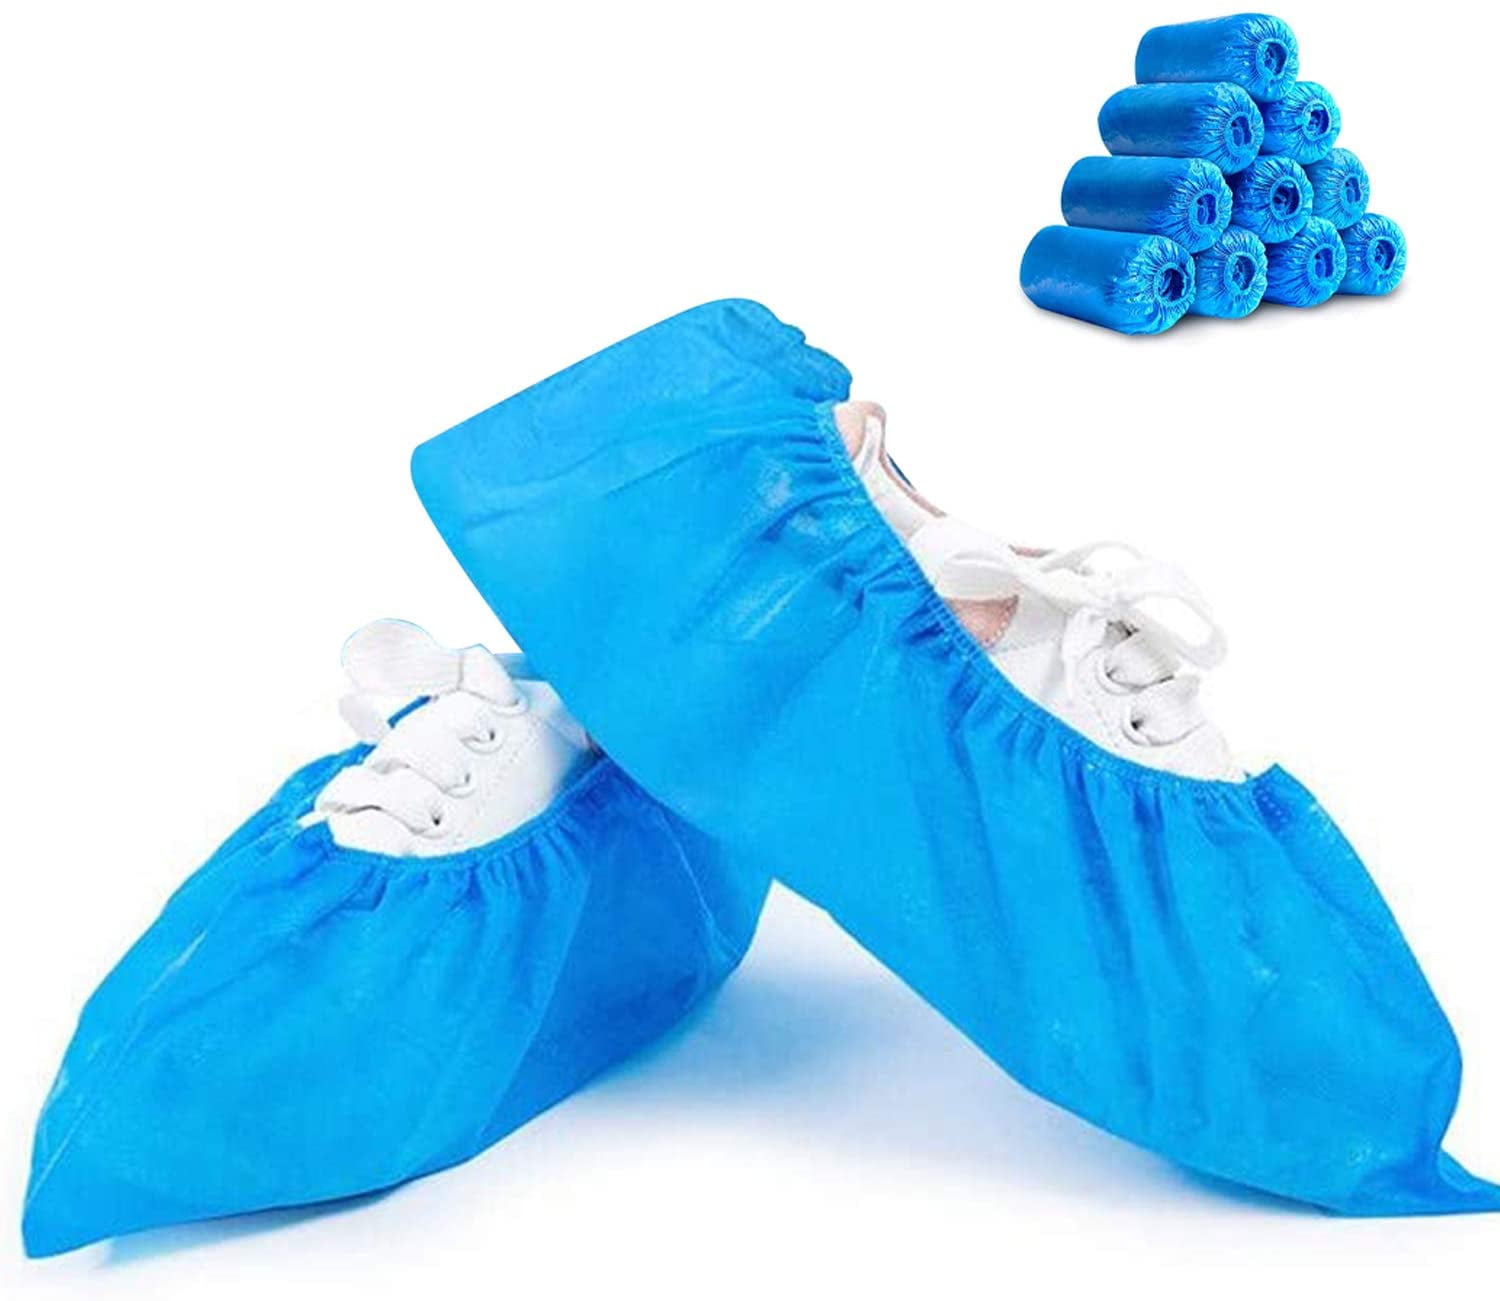 50 Pairs Plastic Rain Waterproof Disposable Shoe Covers For Outdoor Family Home